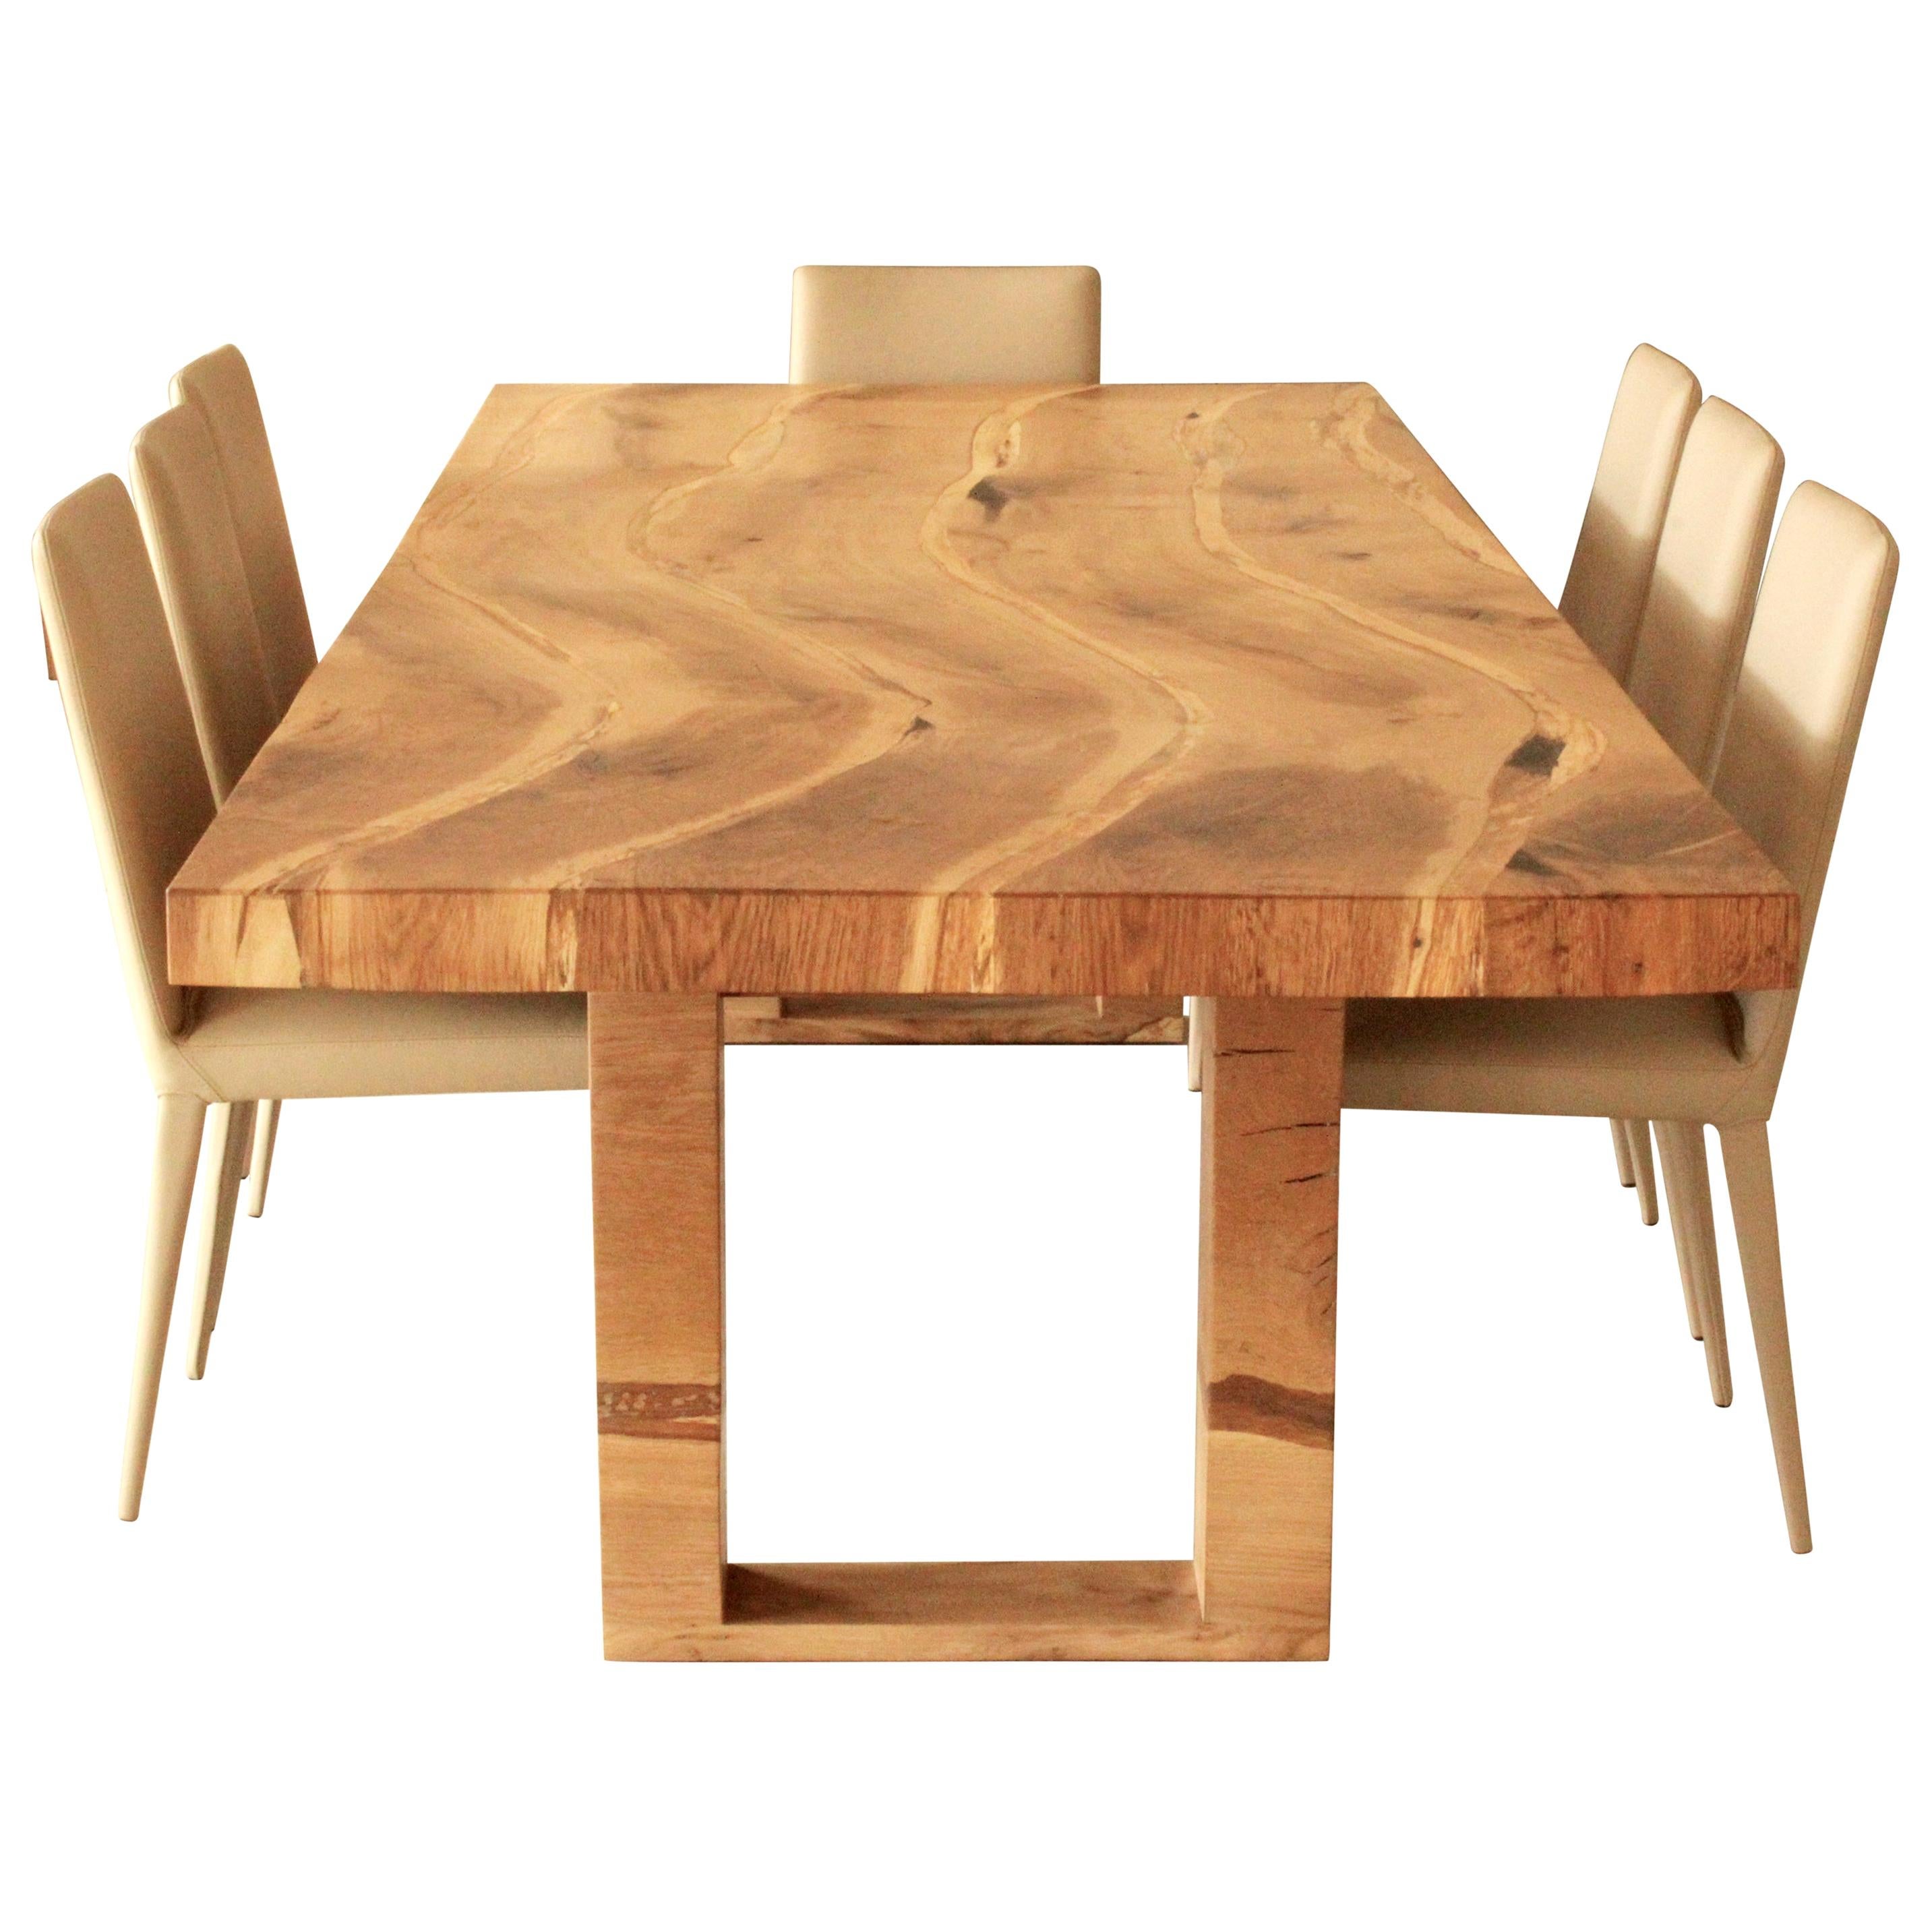 Salvaged English Oak Dining Table by Jonathan Field with Inset Live Edge